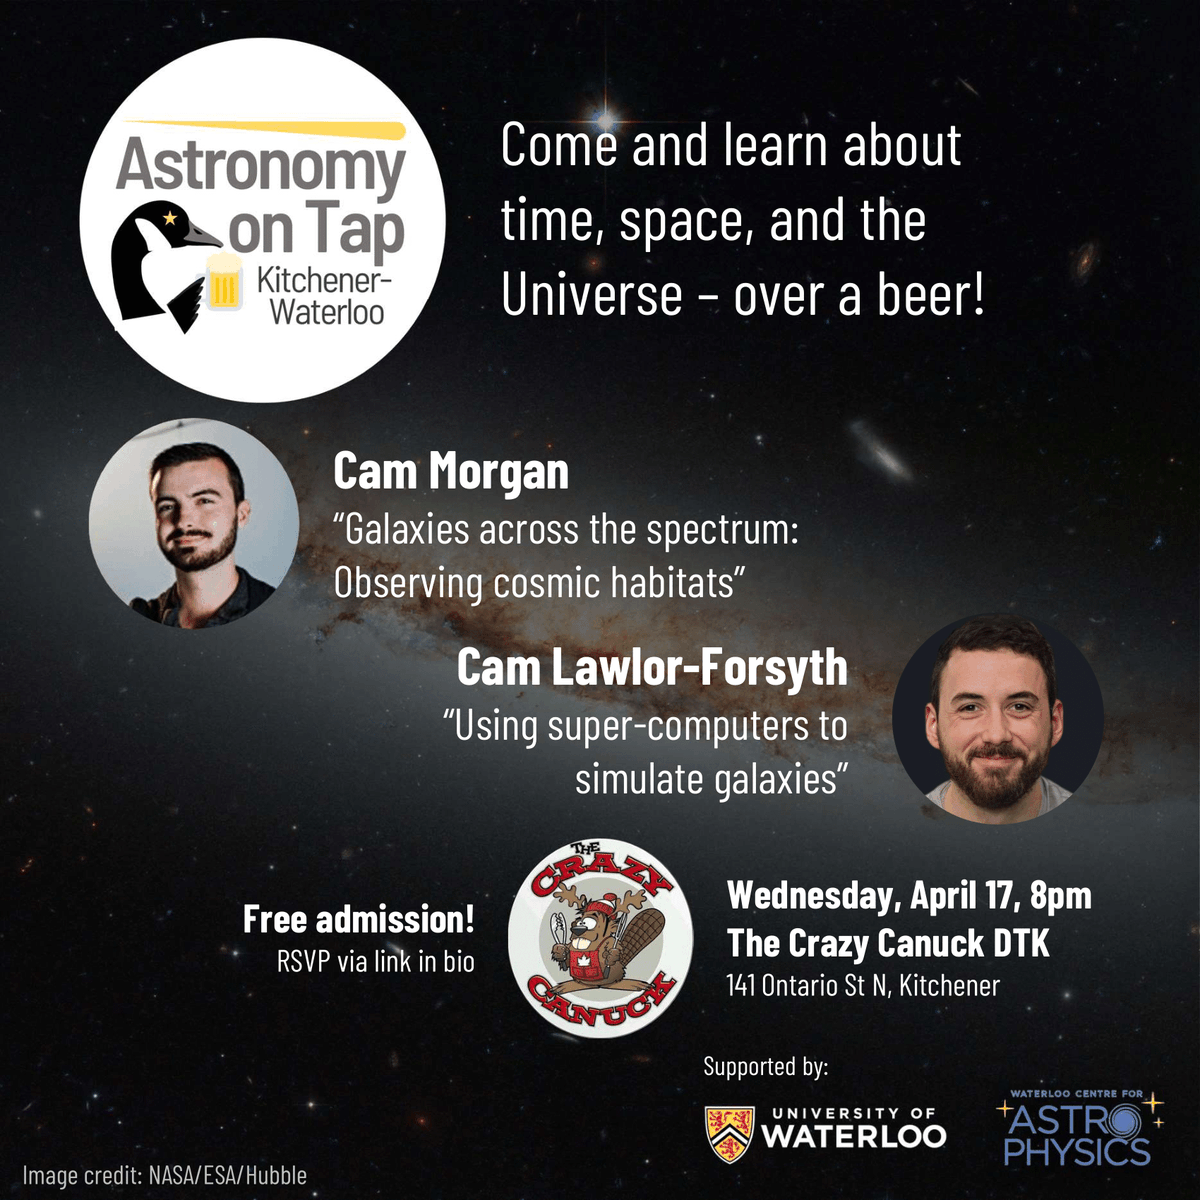 💫 Come hear how we can learn about galaxies through observations and simulations over a beer at our next Astronomy on Tap! ✨ The event is free but there are limited spaces so make sure you get your ticket by clicking here: eventbrite.ca/e/astronomy-on…